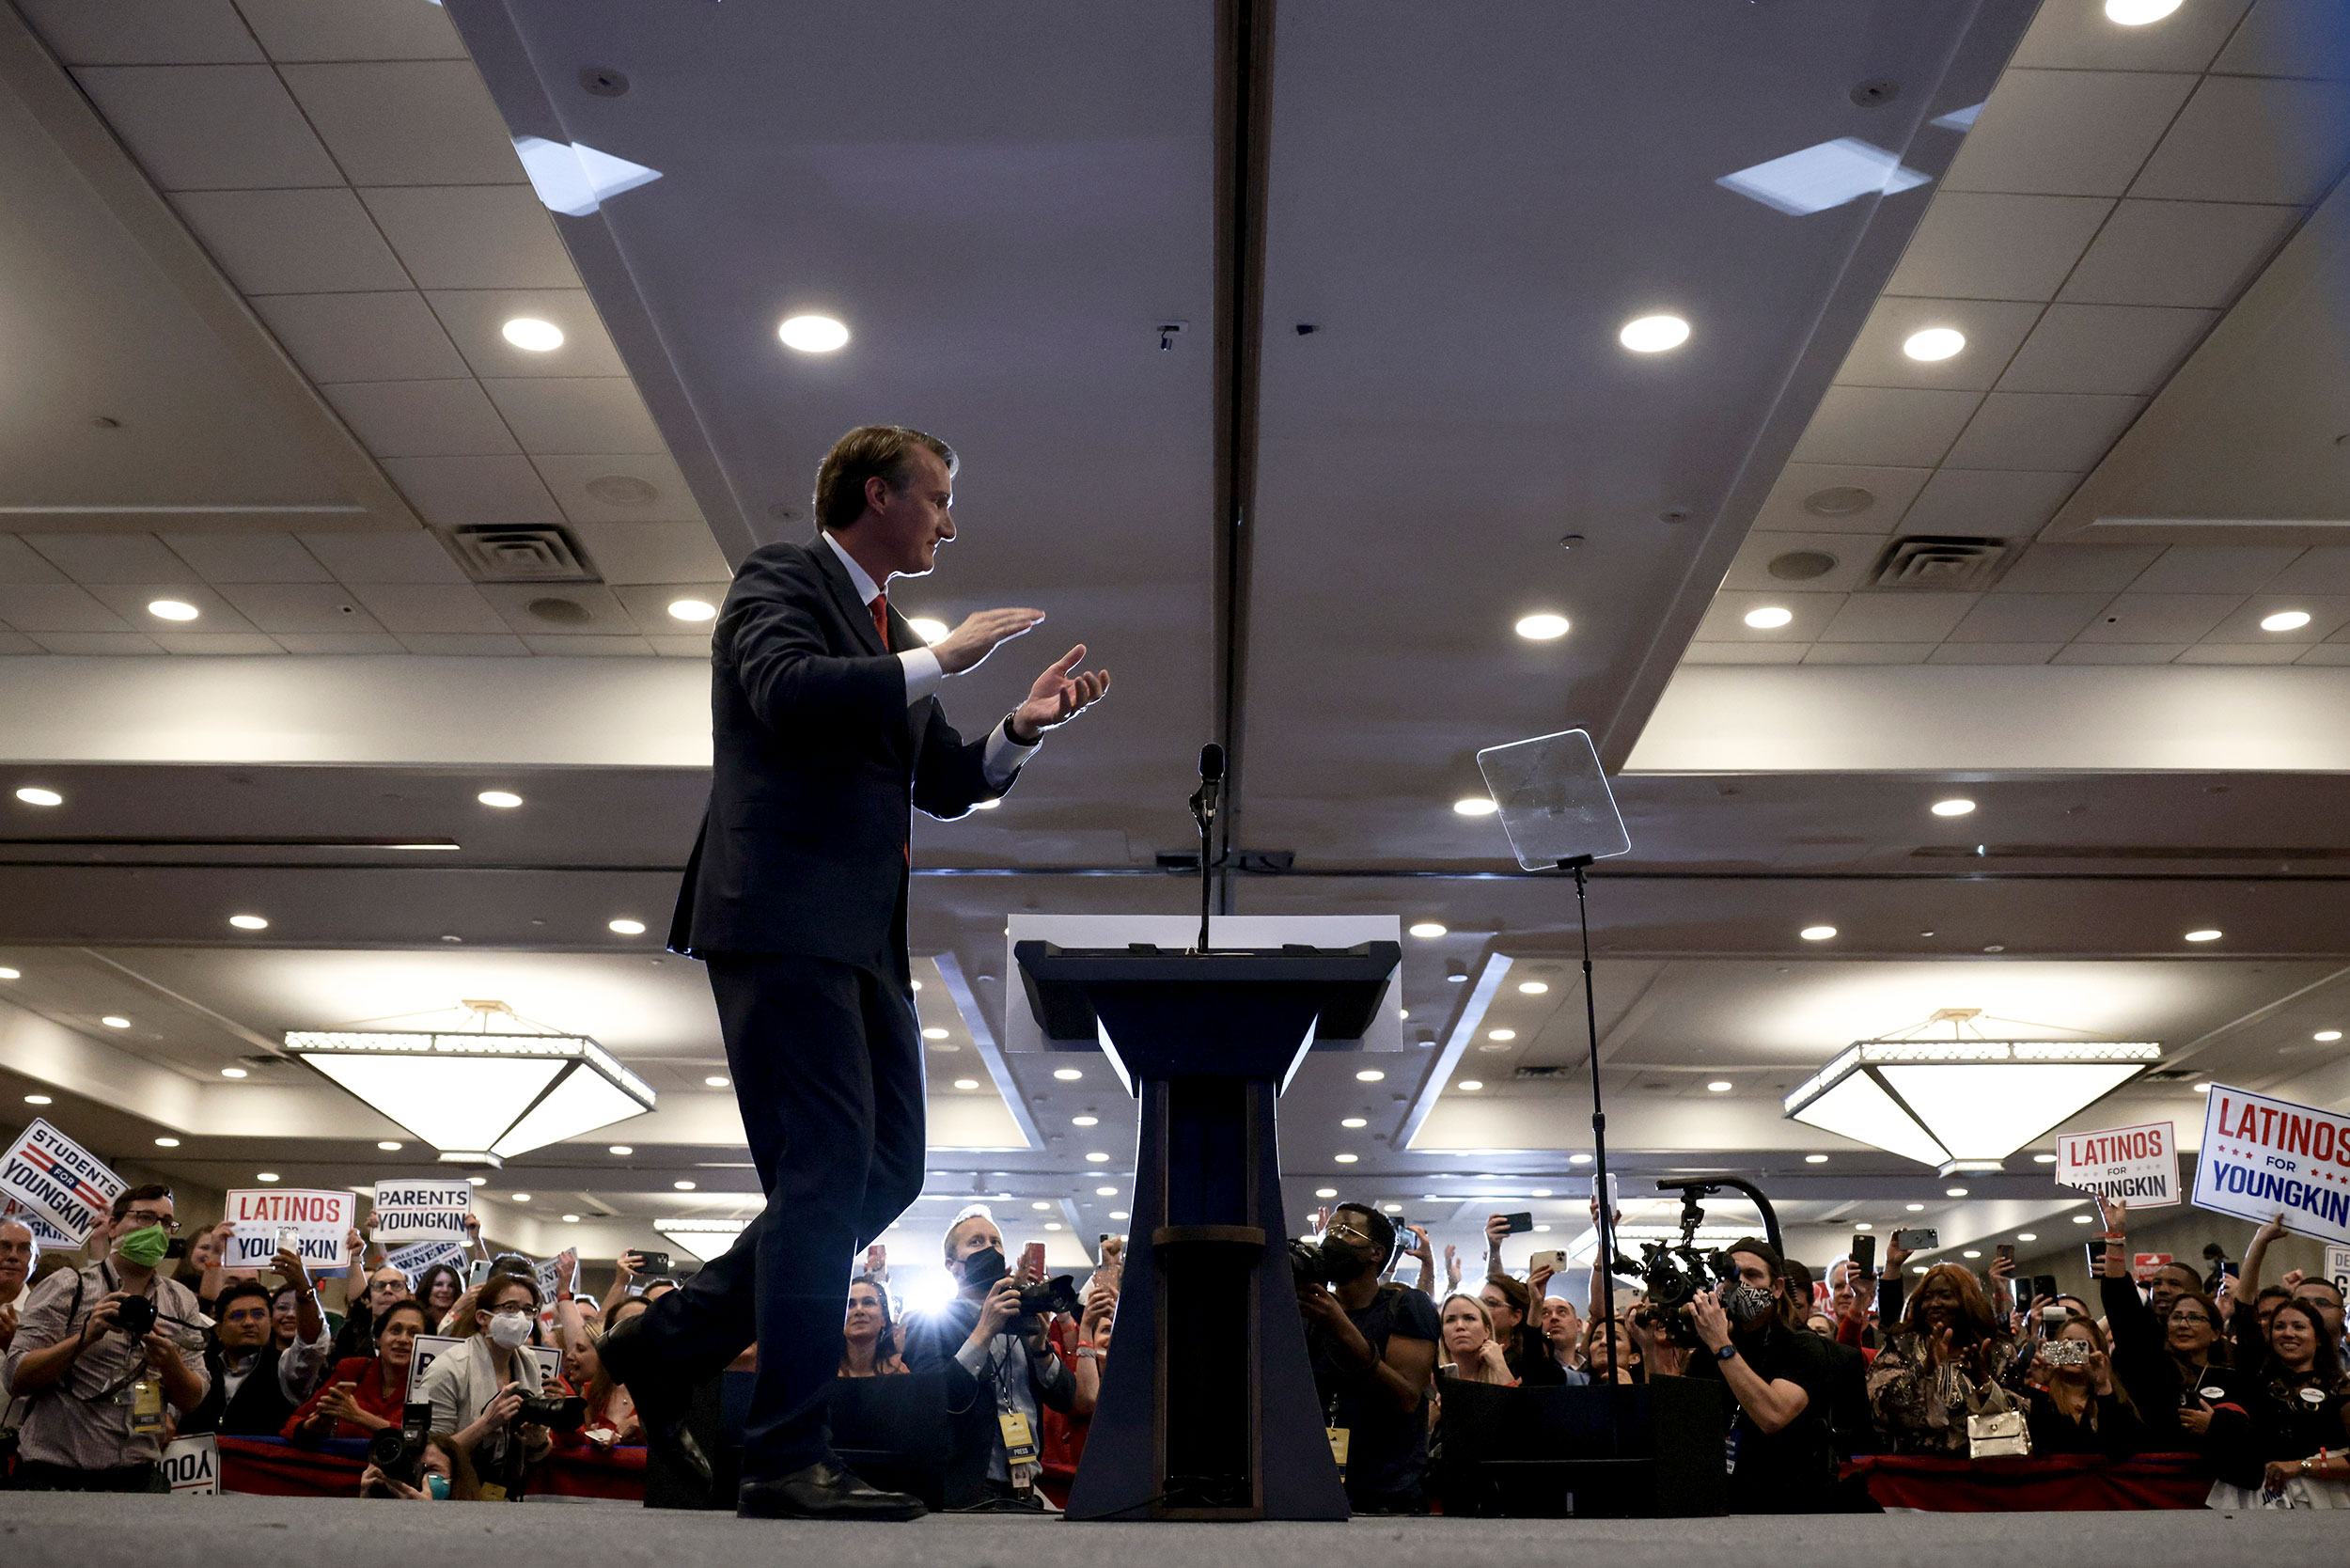 Glenn Youngkin walks onstage to address supporters in Chantilly, Virginia, on November 2.